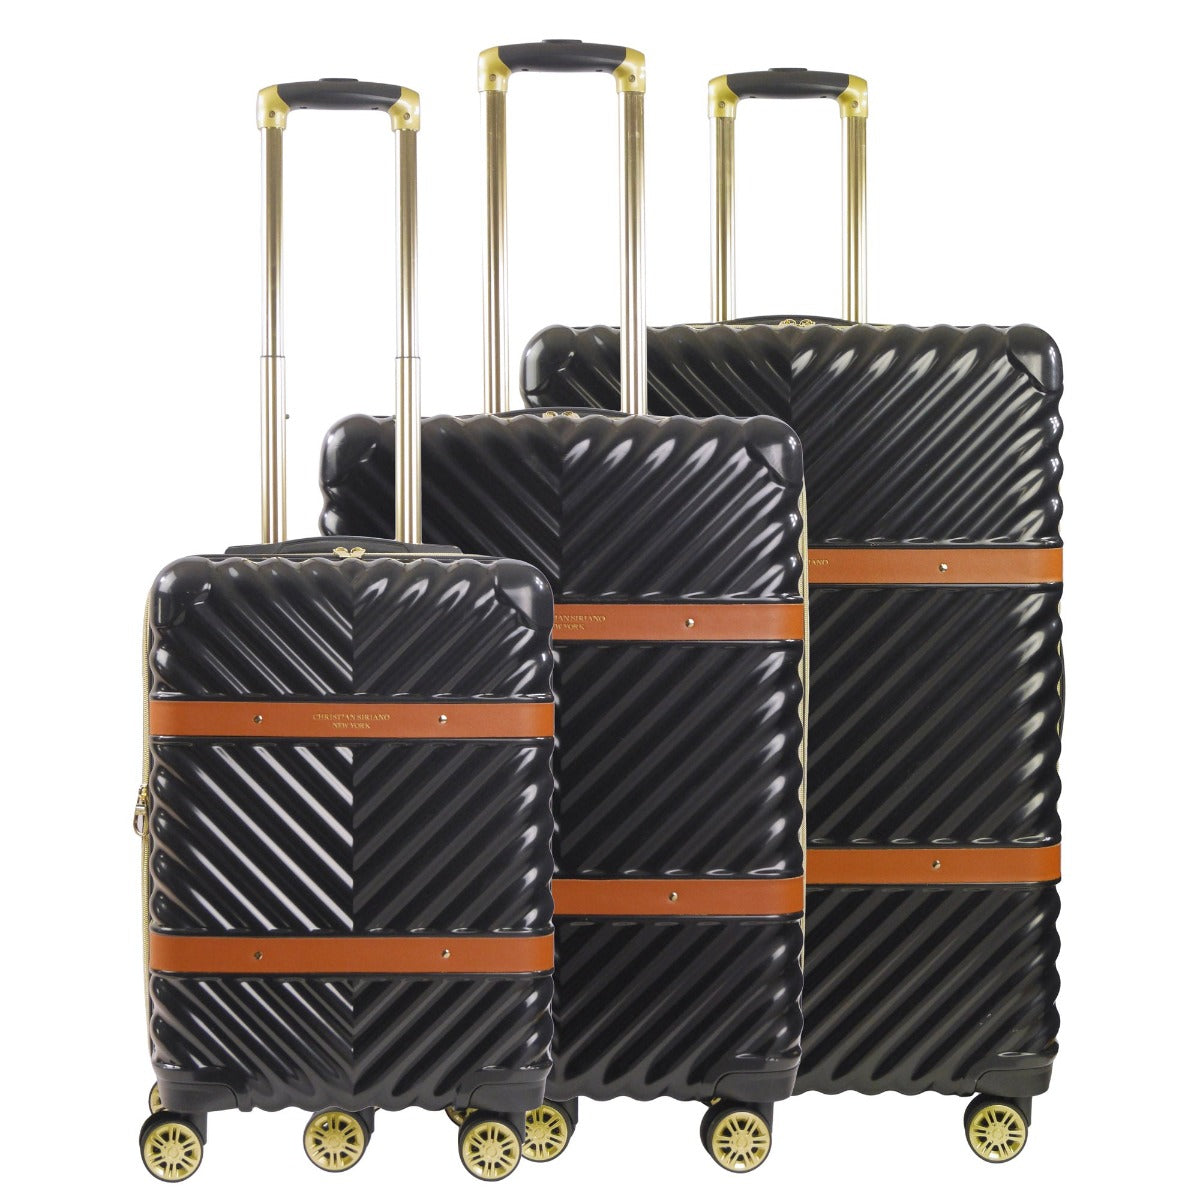 New luggage Removable wheels